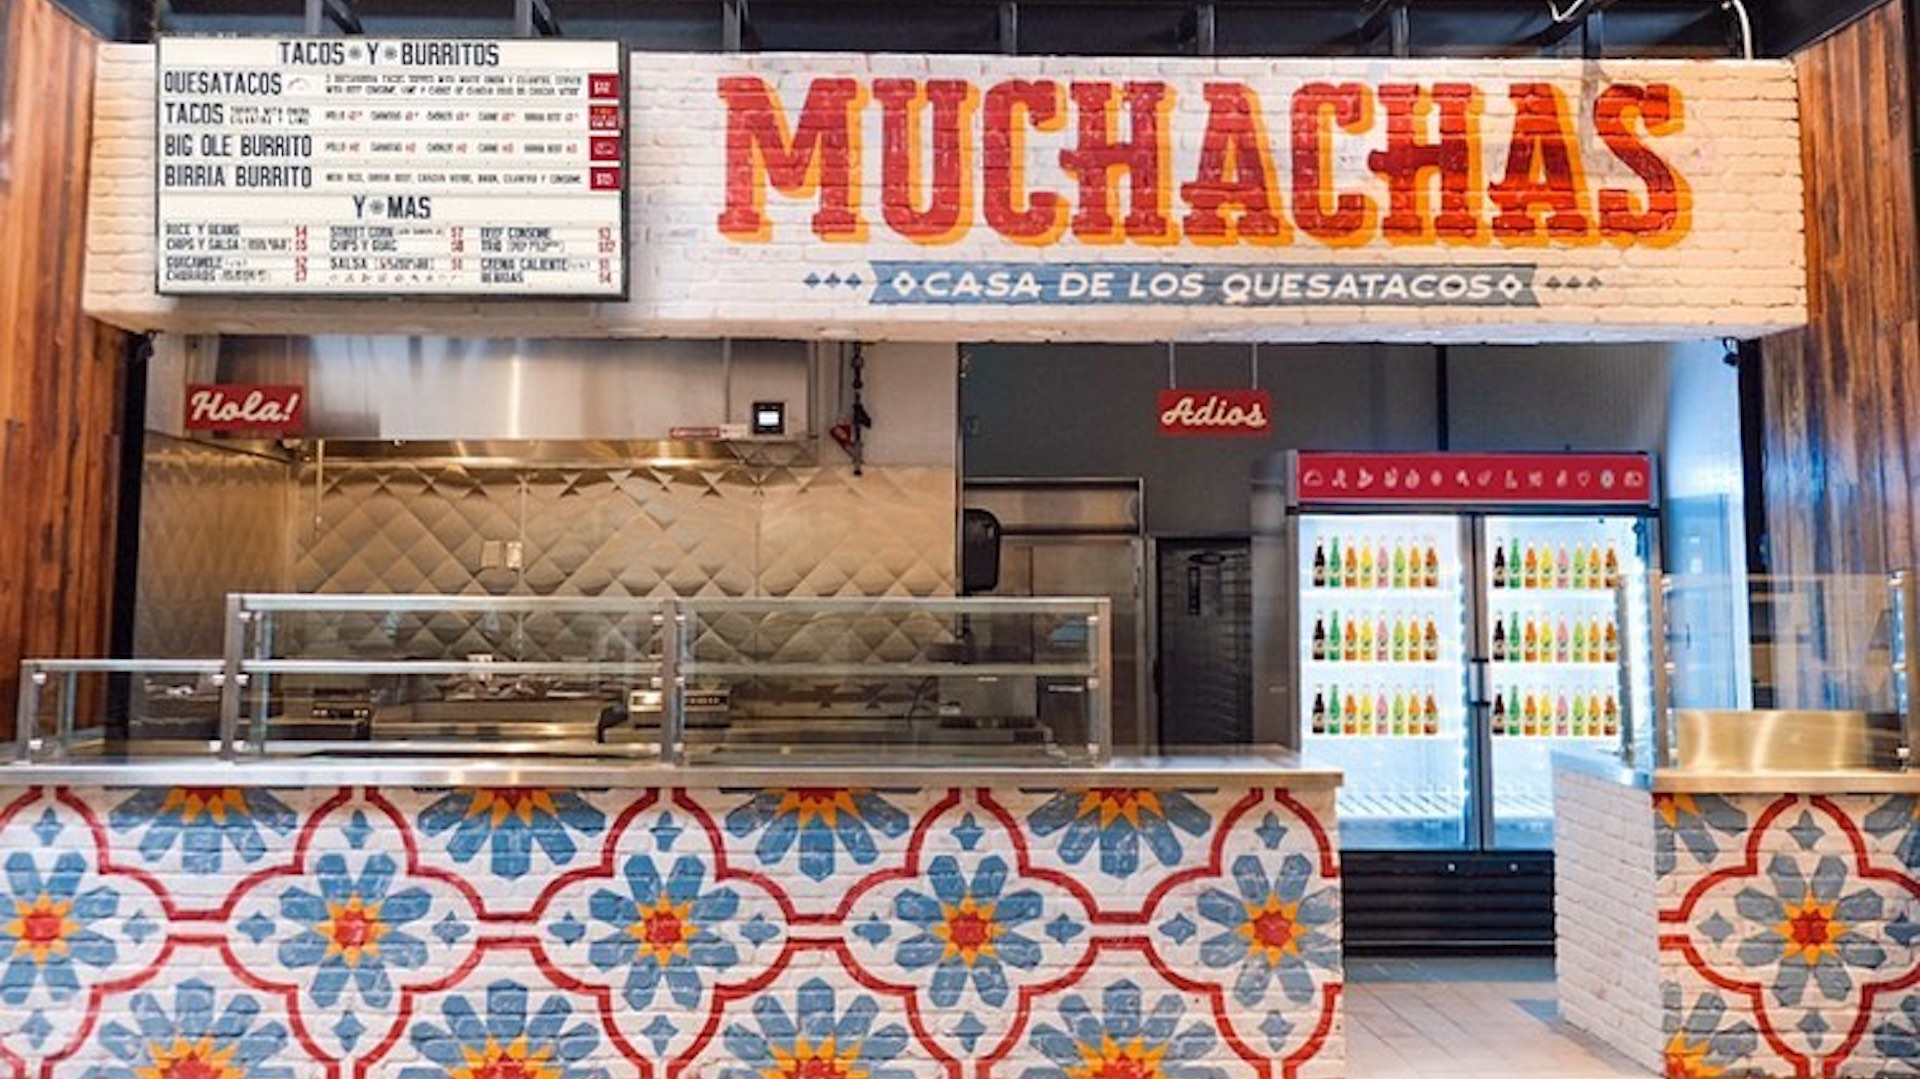 Exterior of a restaurant with a hand painted sign reading "Muchachas"